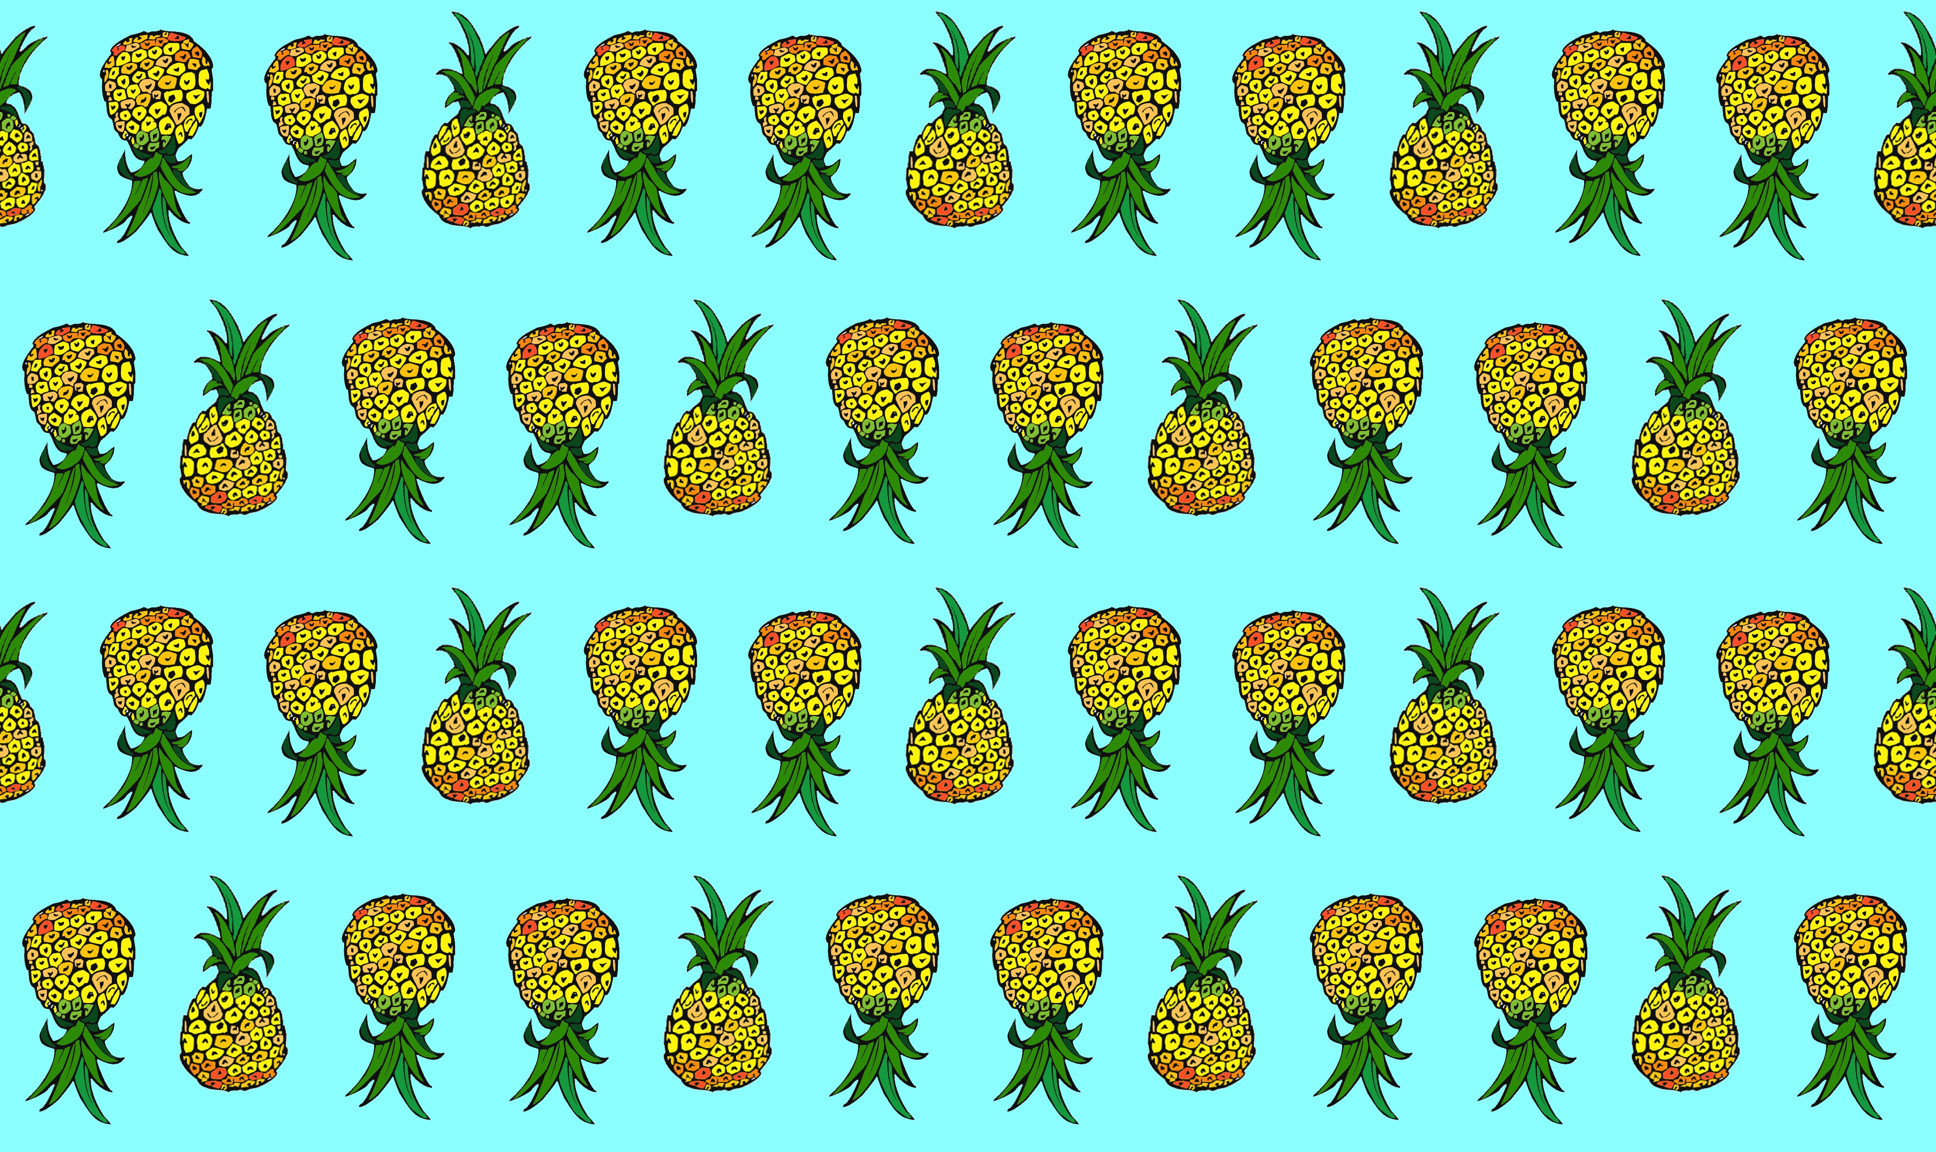 The Big Pineapple Pineapple Wallpapers - Pineapple Background For Laptop - HD Wallpaper 